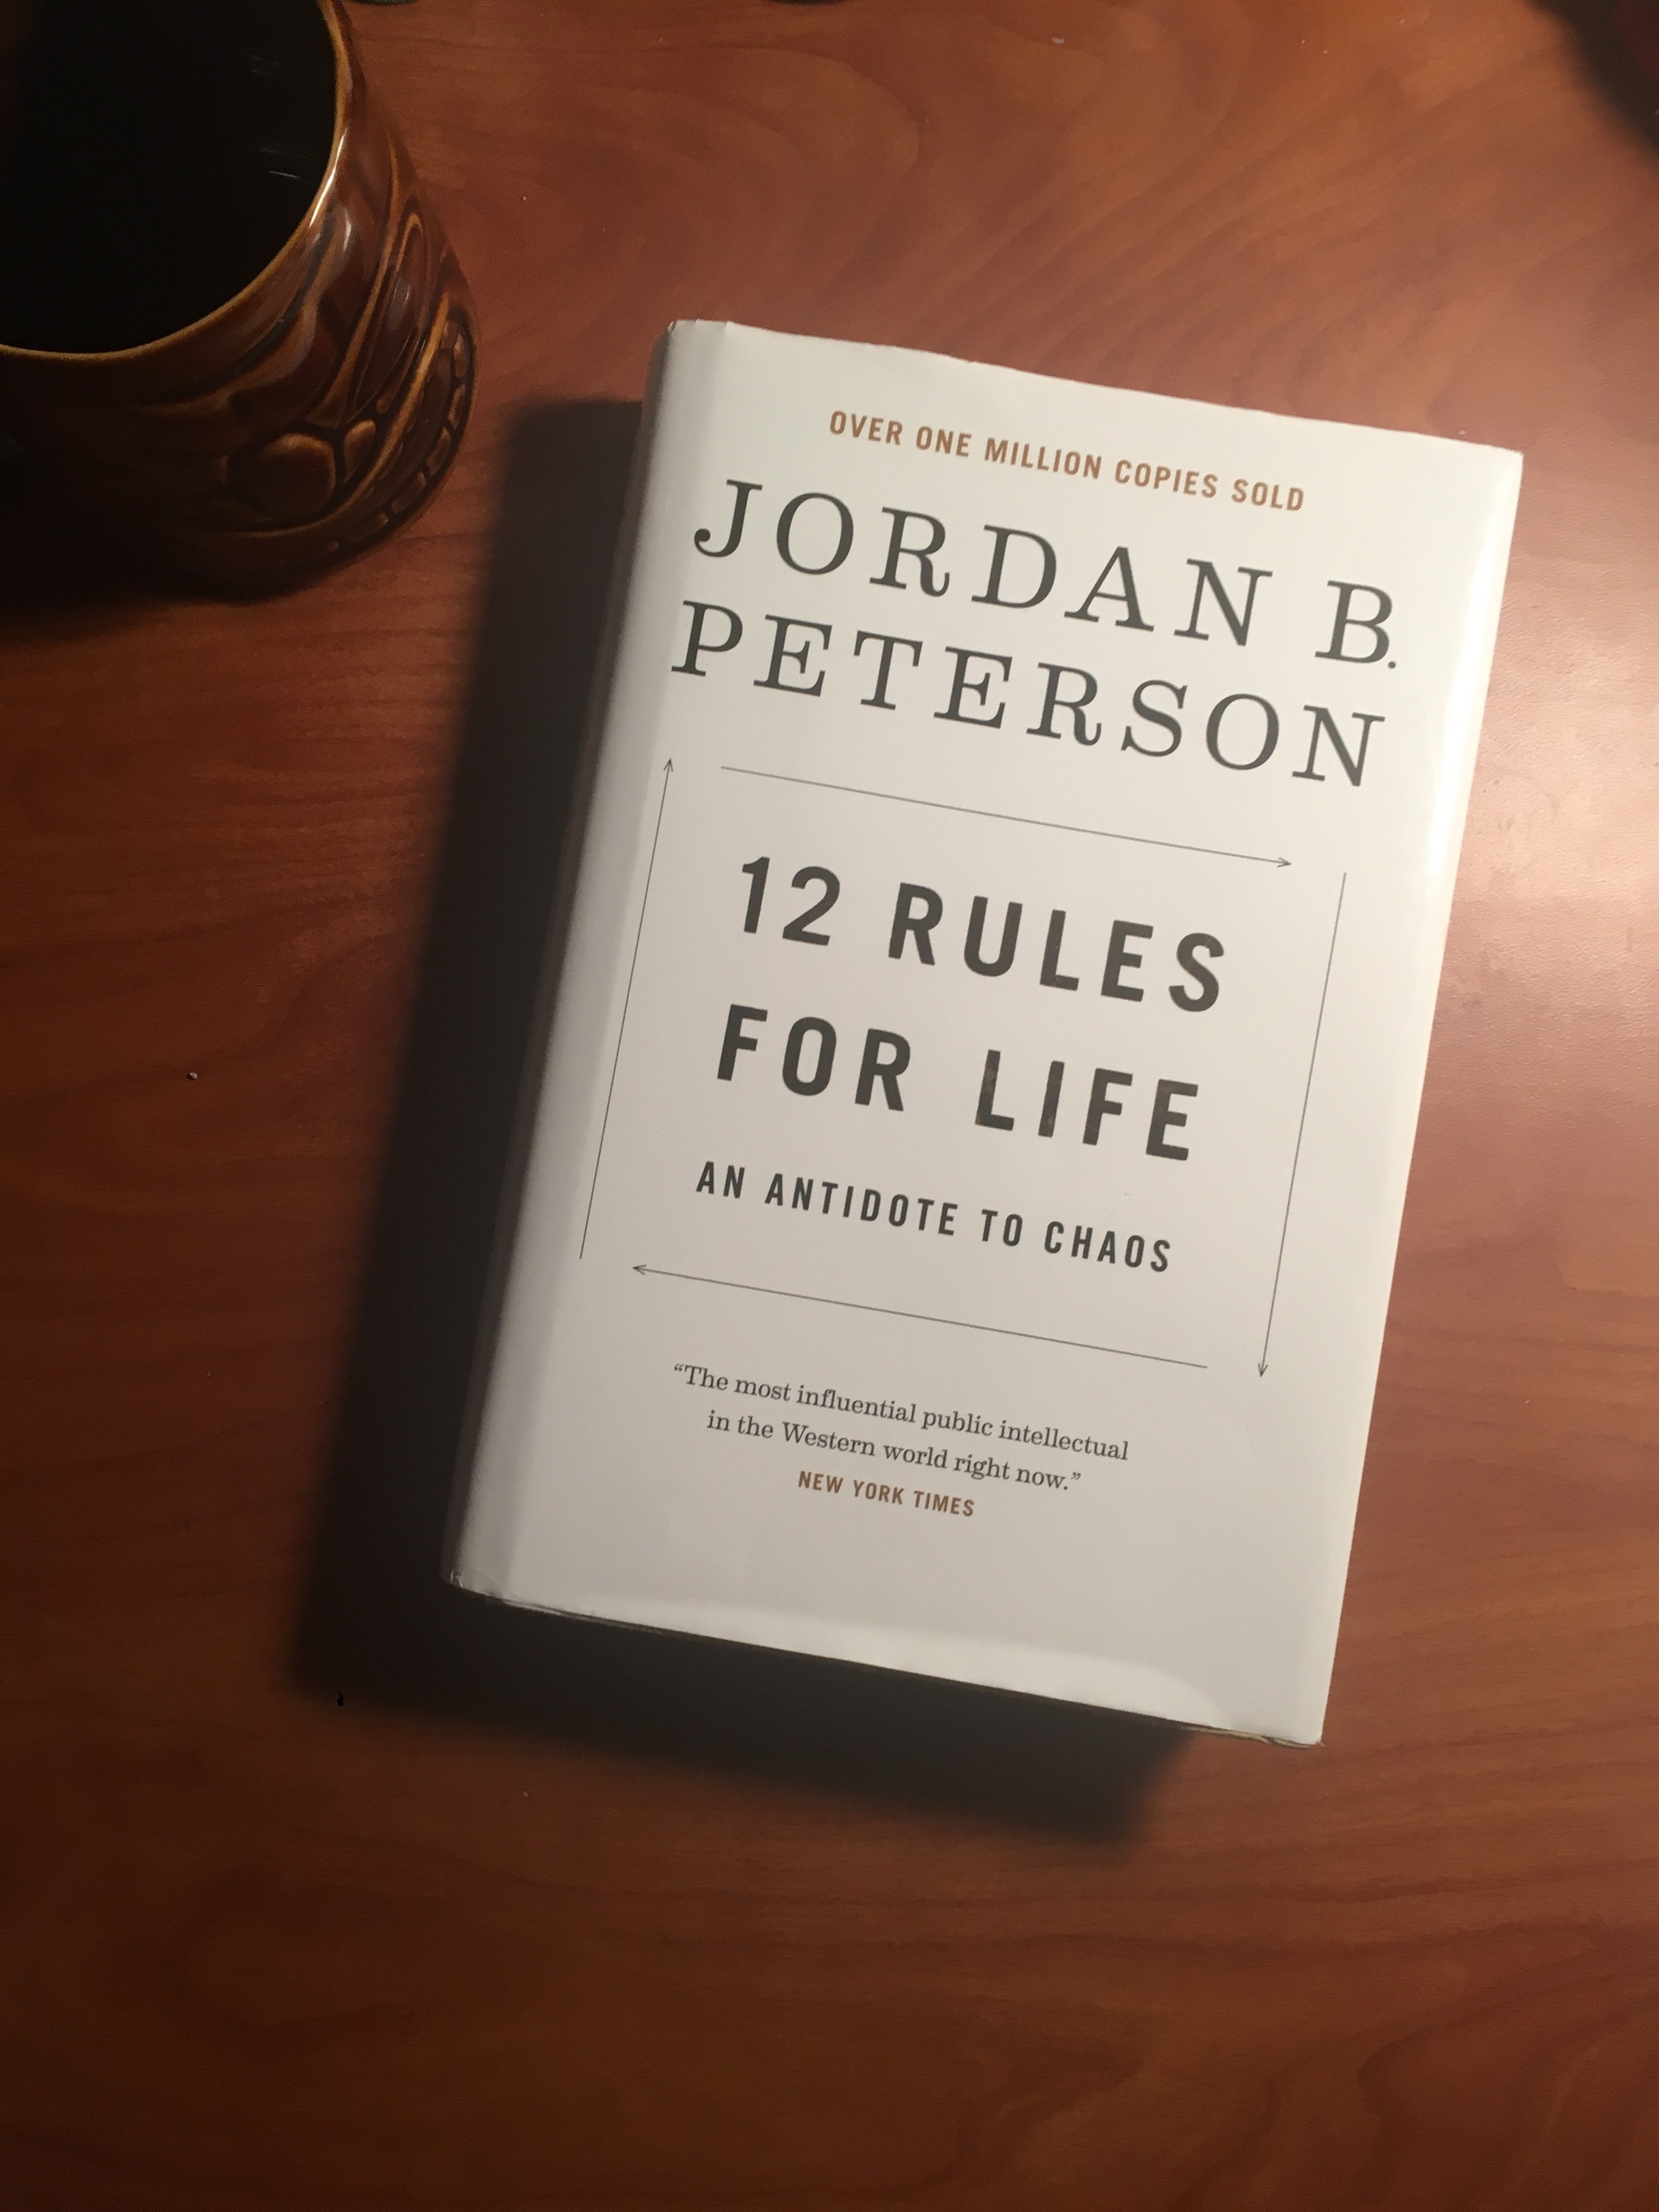 12 rules for life audiobook download